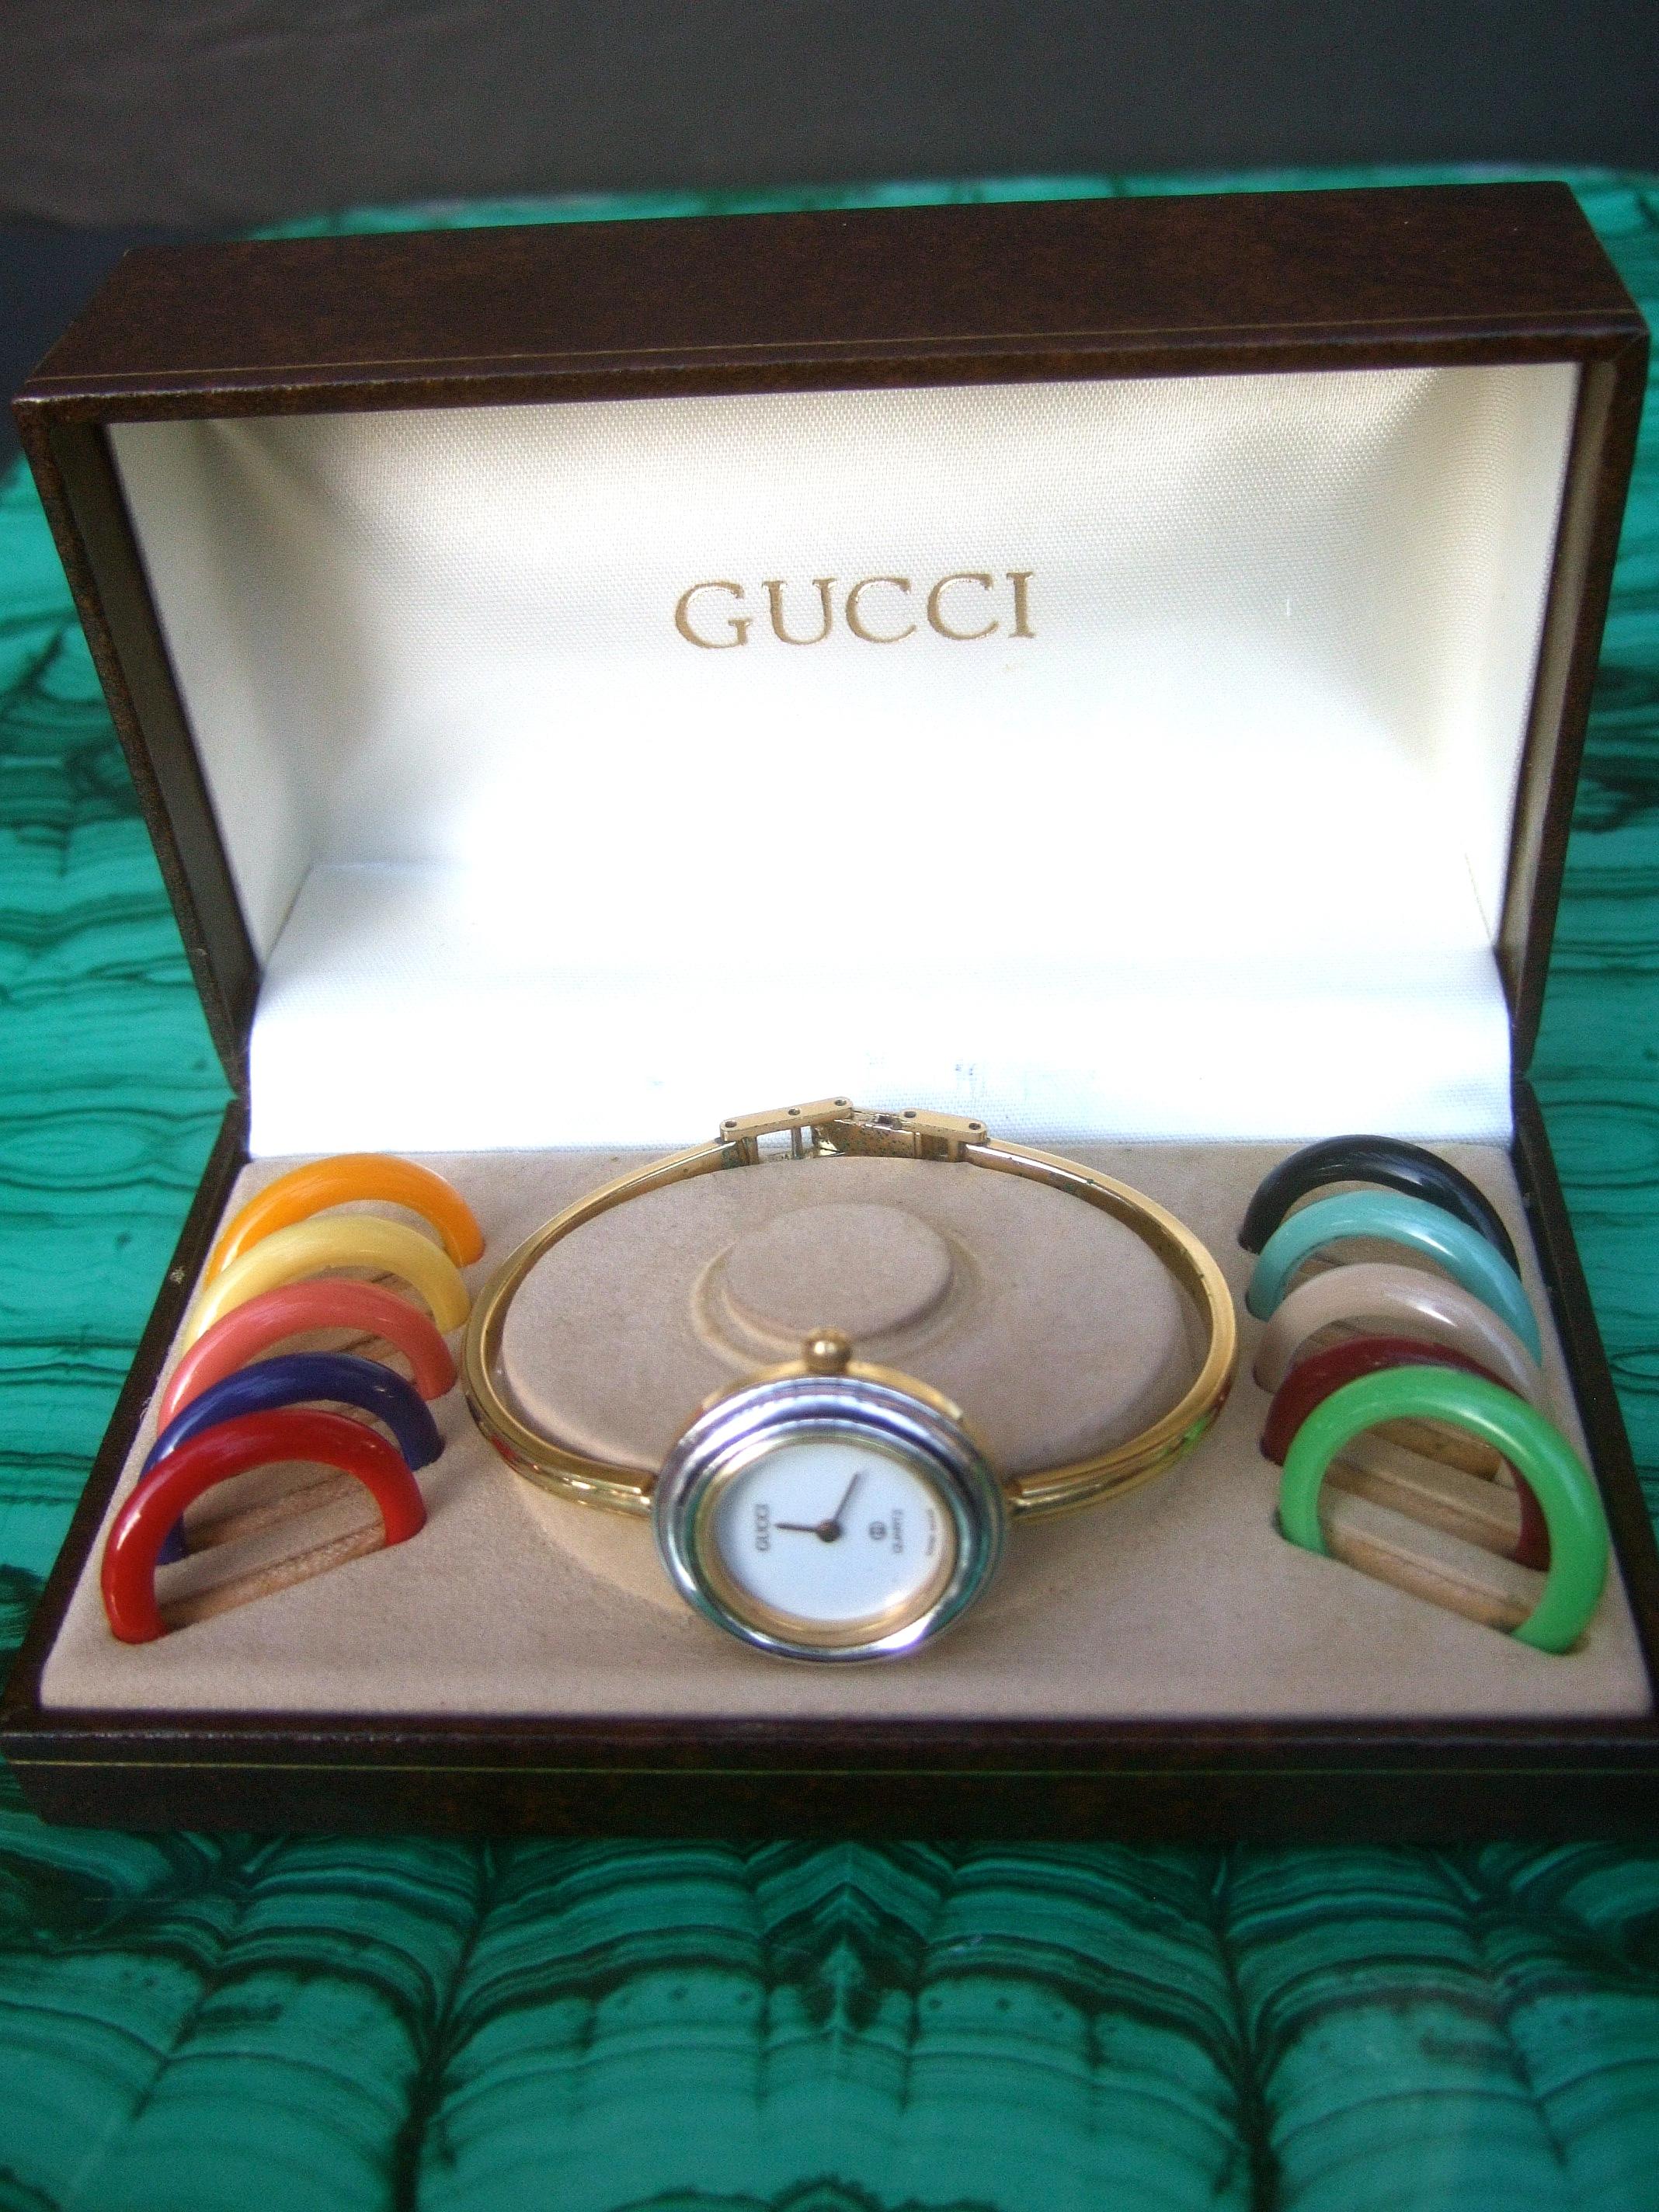 Gucci women's wrist in original Gucci presentation box c 1980s
The stylish wrist watch is designed with ten plastic resin interchangeable 
circular dial rings in a myriad of colors. It too may be worn with the silver
and gold tone circular dial